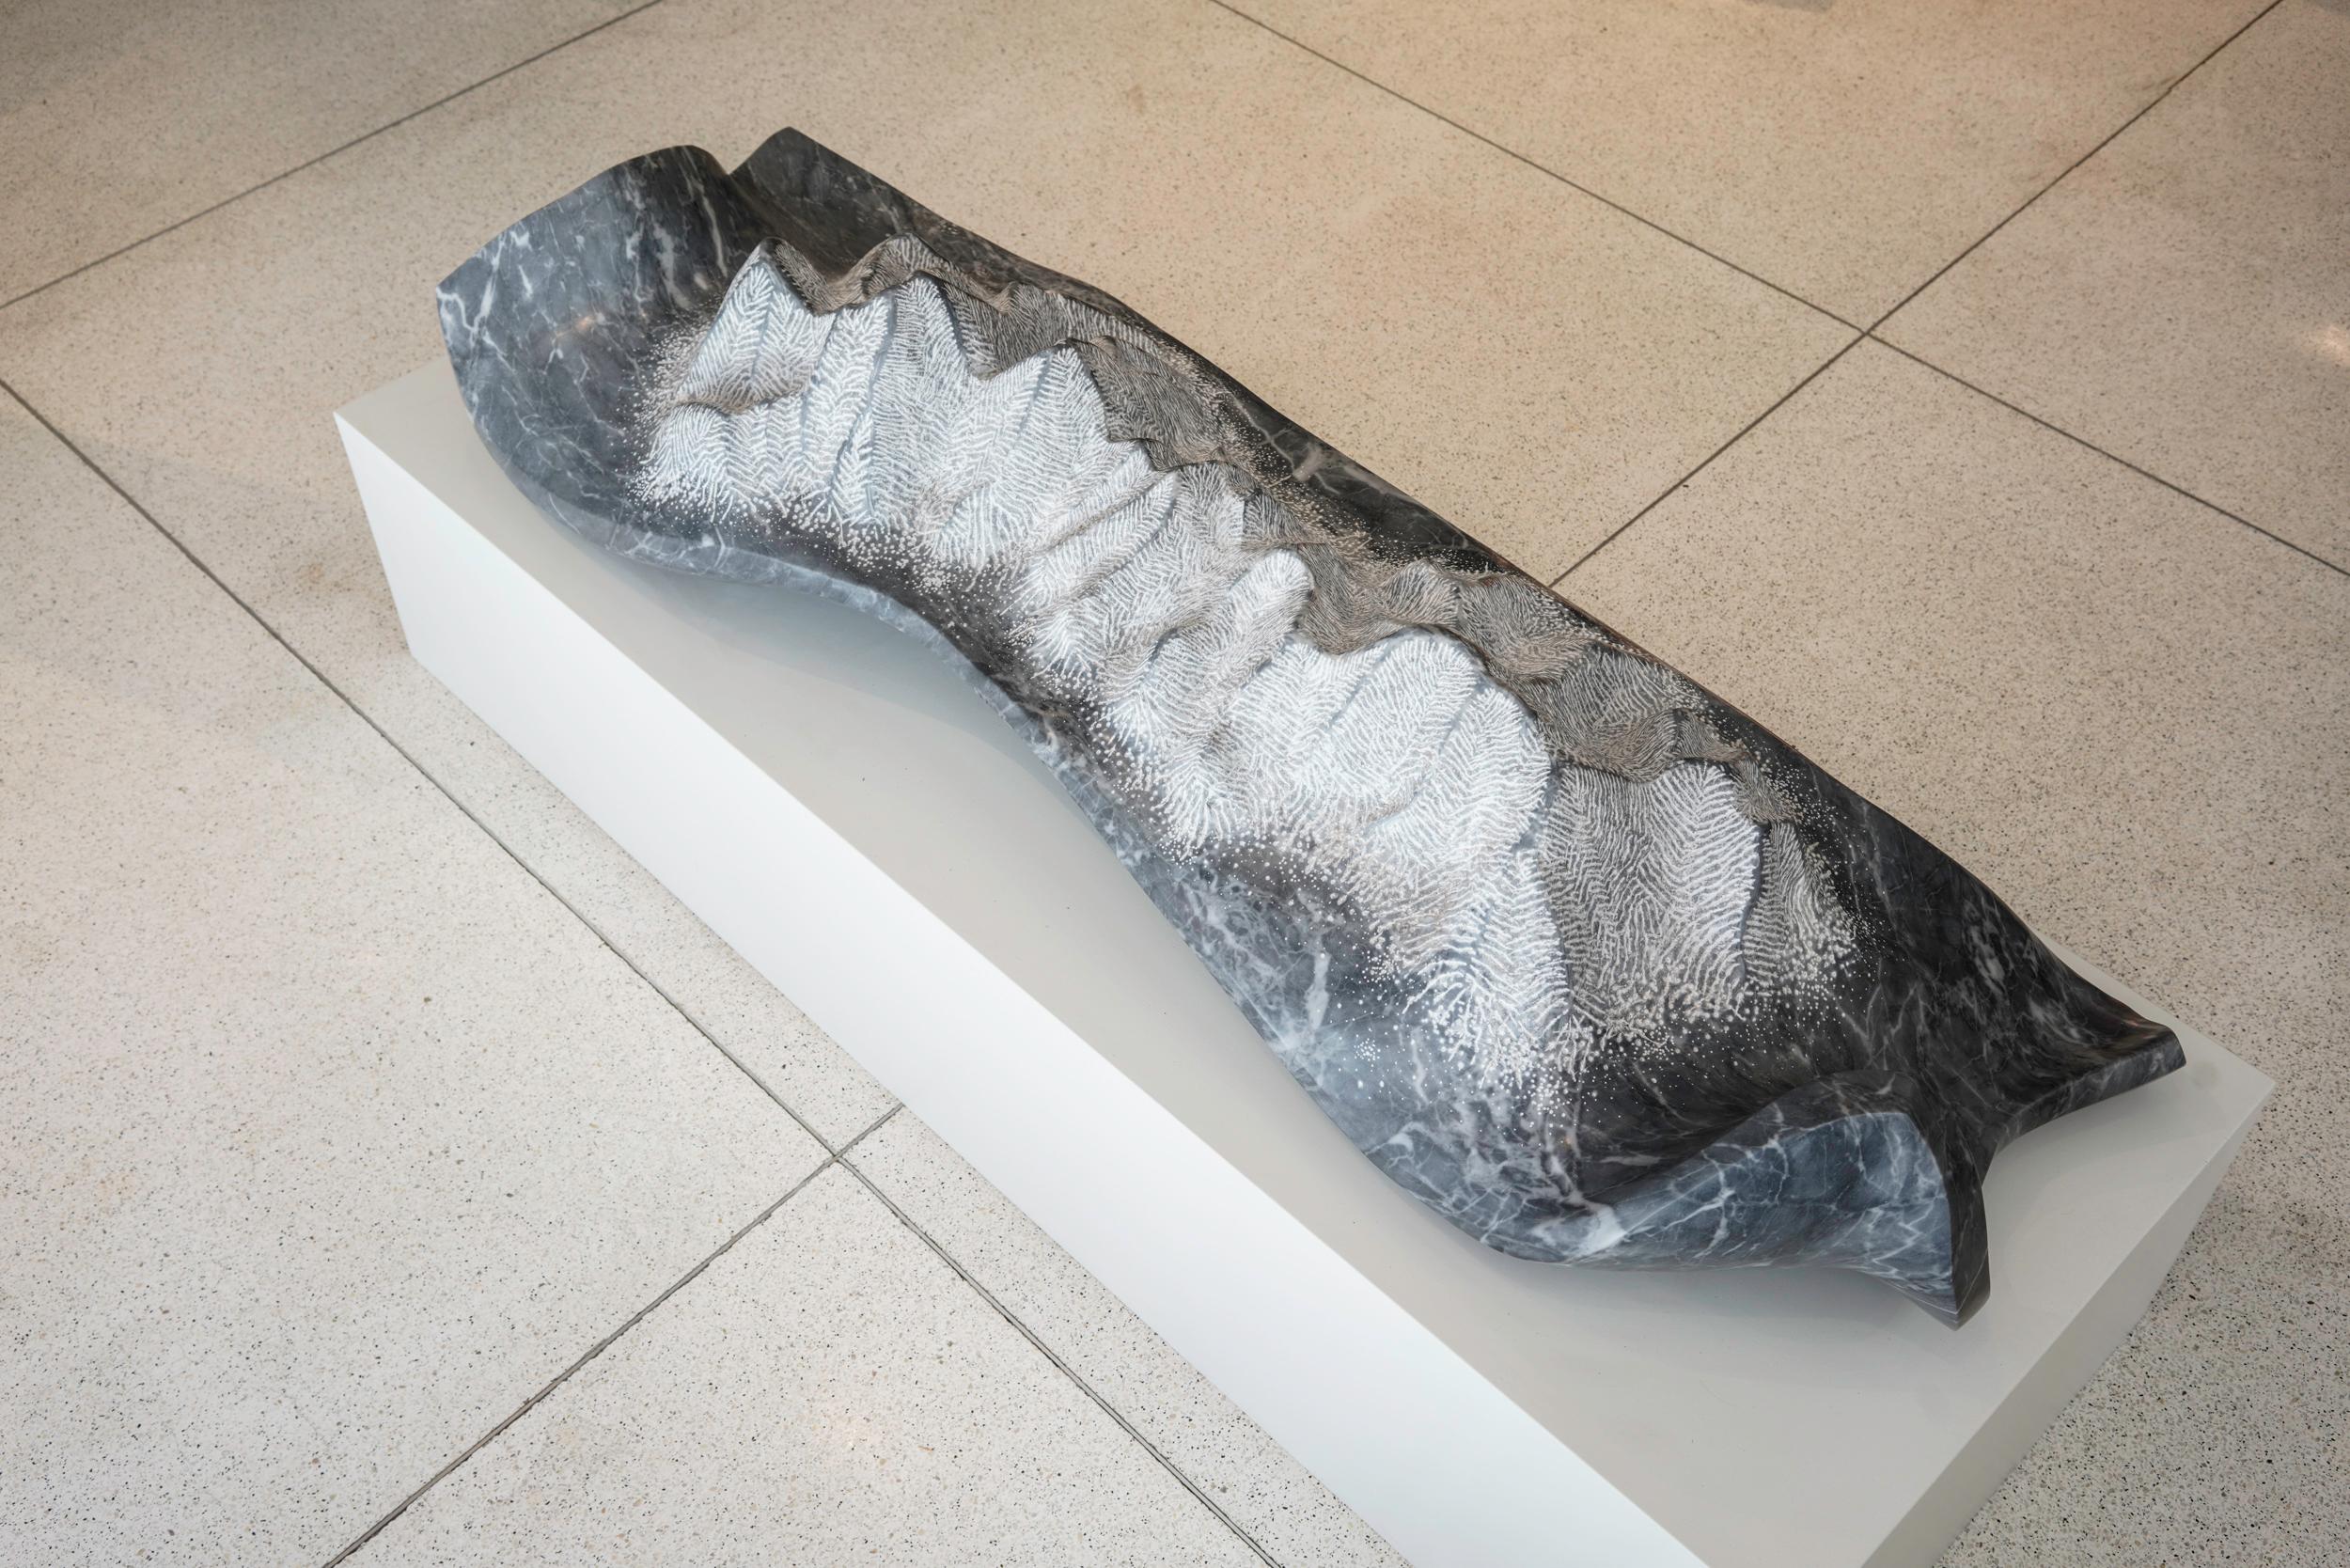 Bardiglio grey marble sculpture by Juan Pablo Marturano, Argentina, 2016.
Titled: 